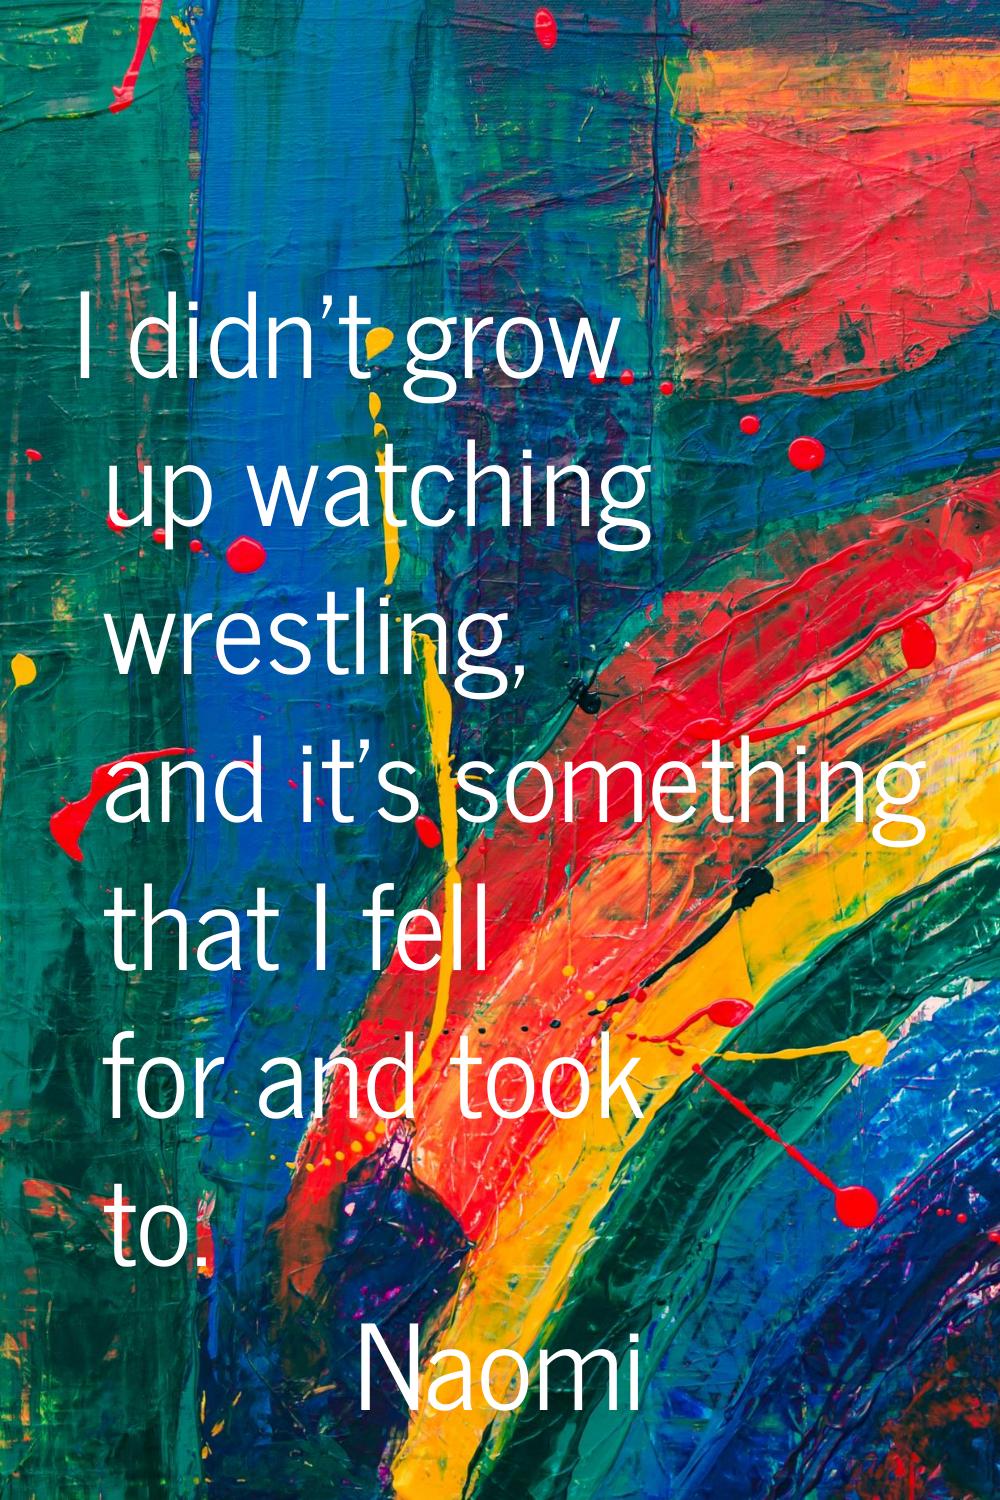 I didn't grow up watching wrestling, and it's something that I fell for and took to.